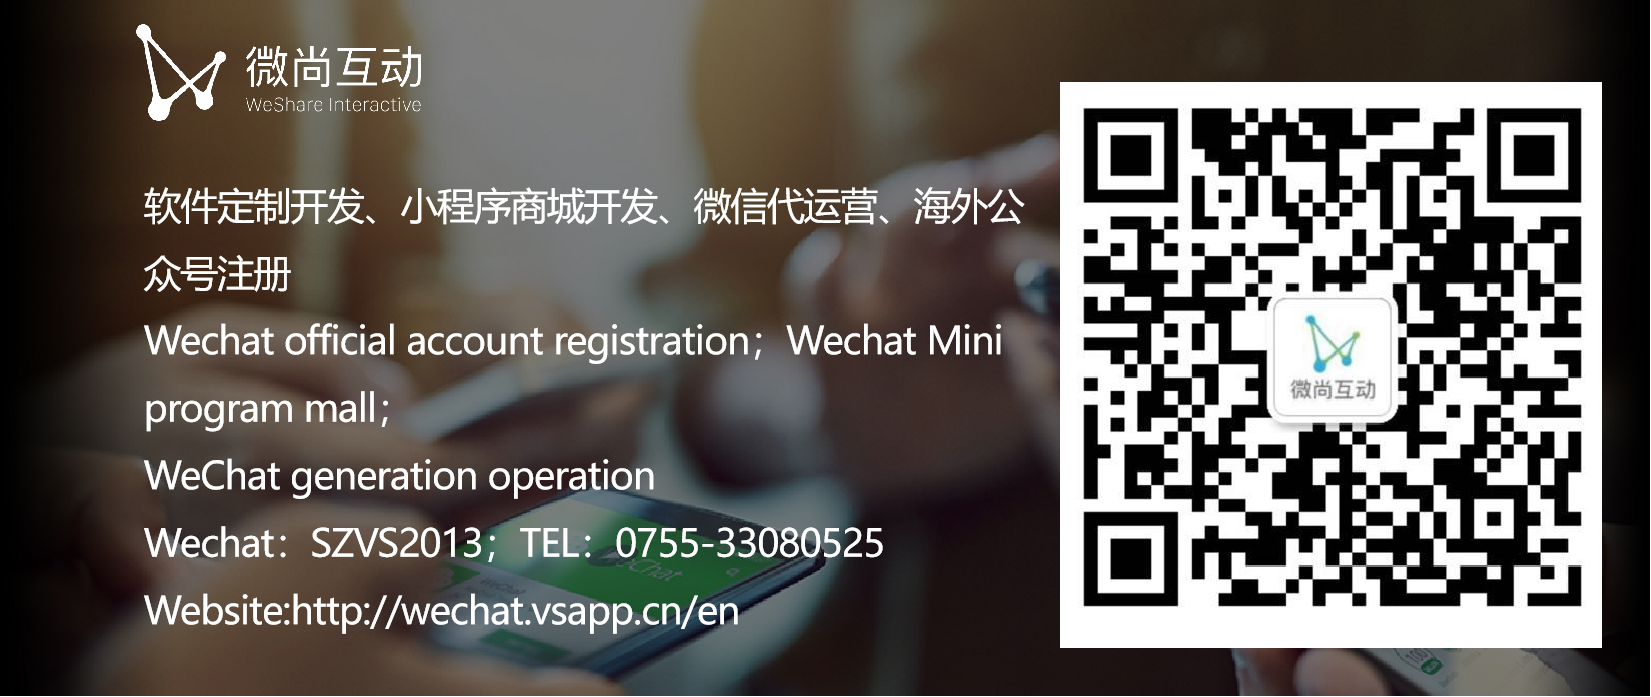 wechat mall wechat account.png